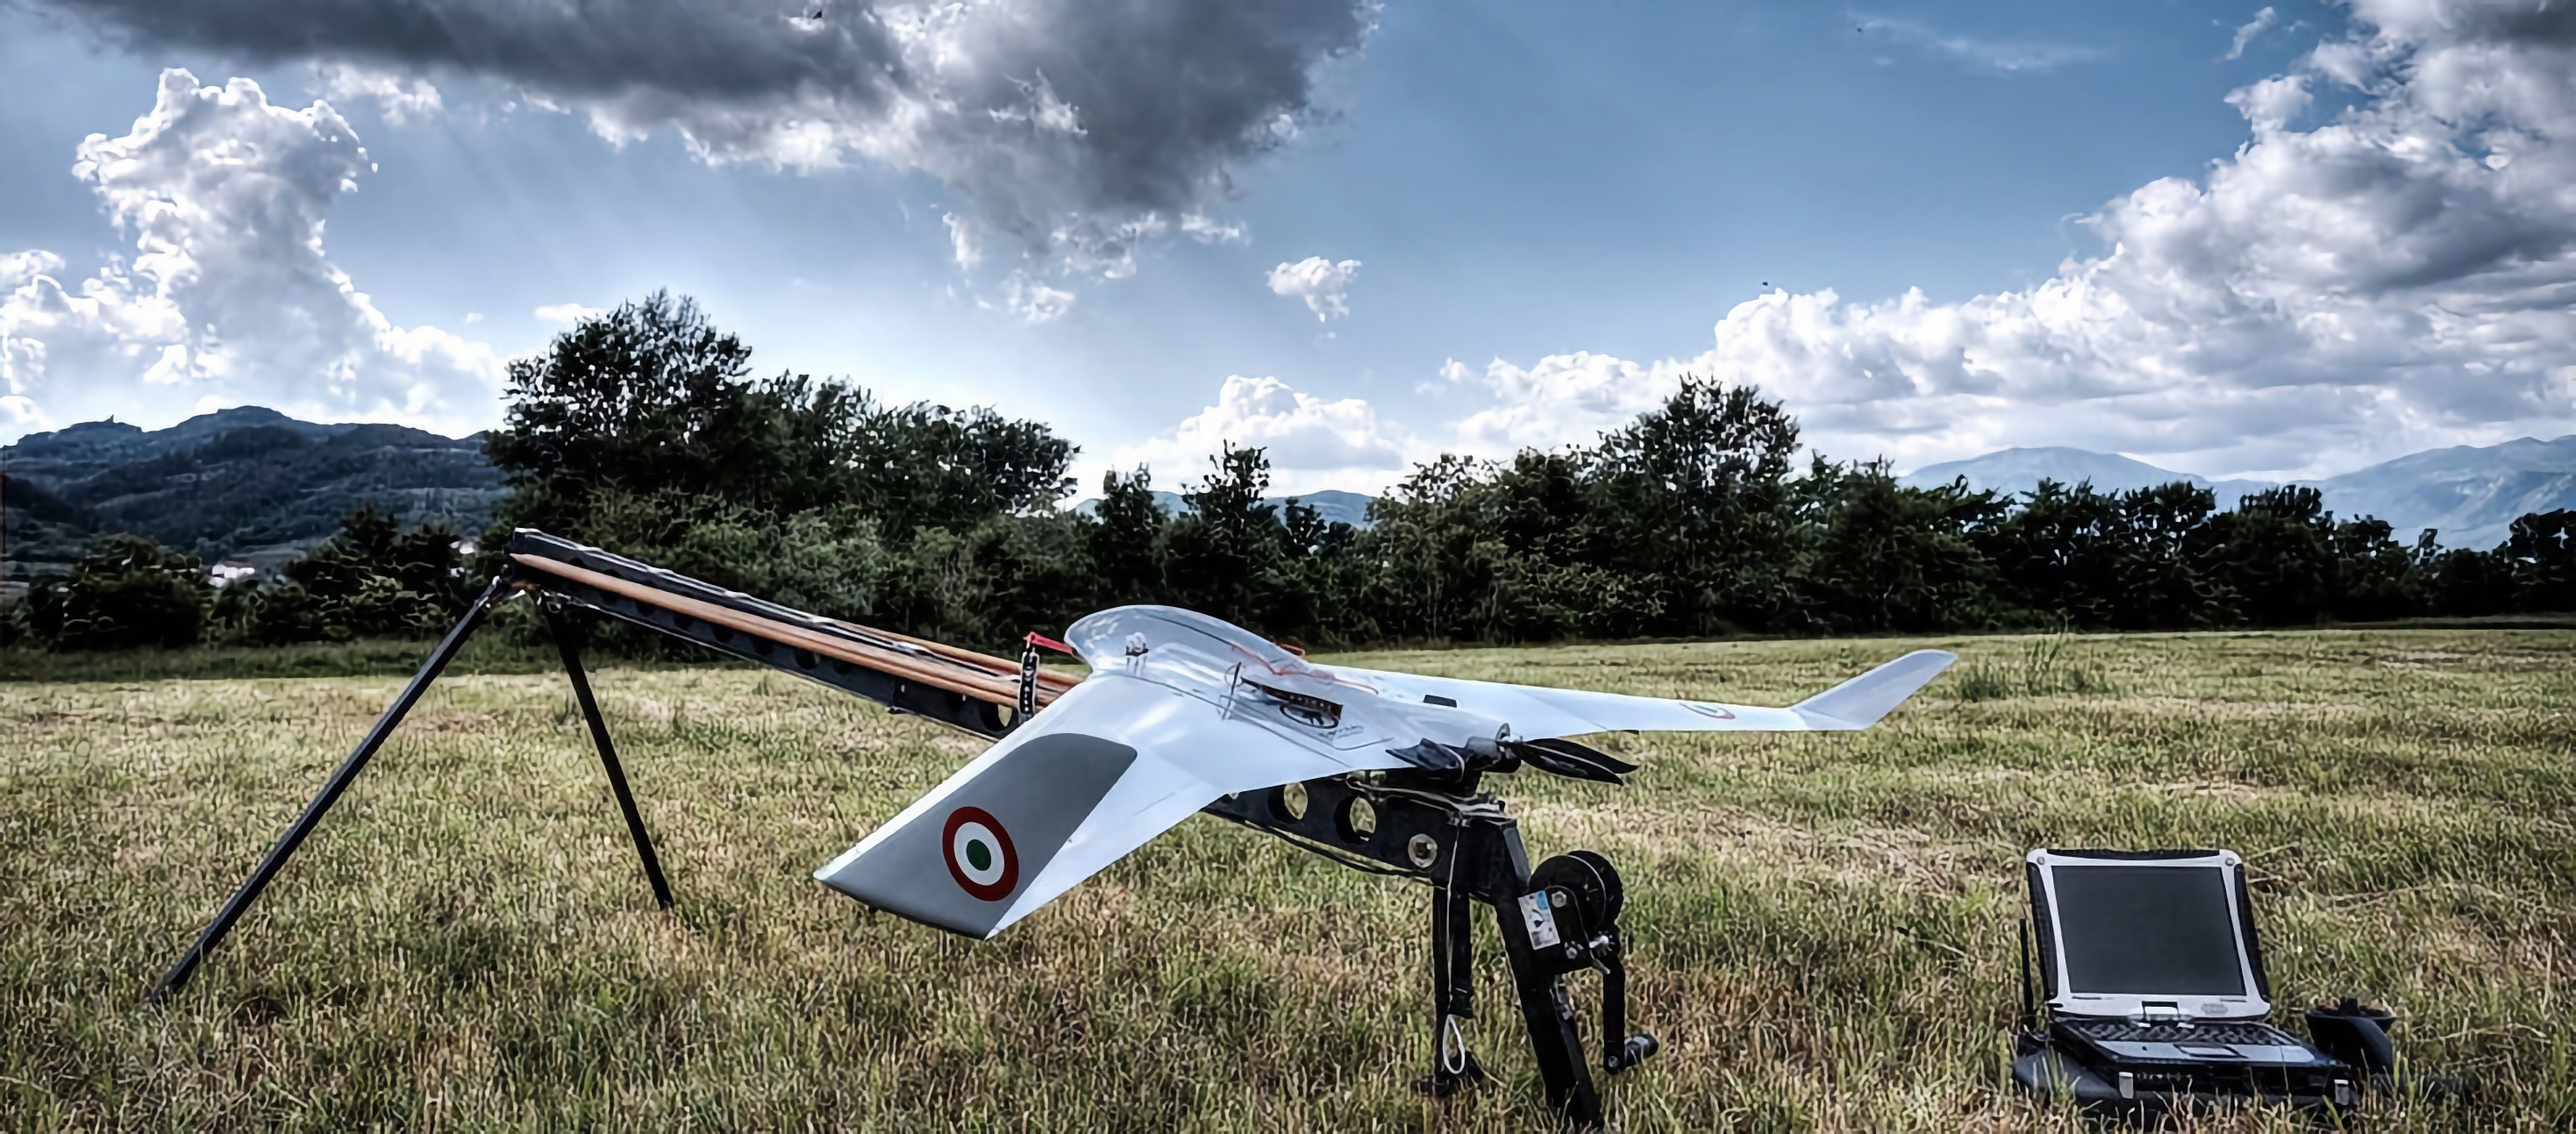 The AFU has received Slovenian Bramor C4EYE reconnaissance UAVs for service